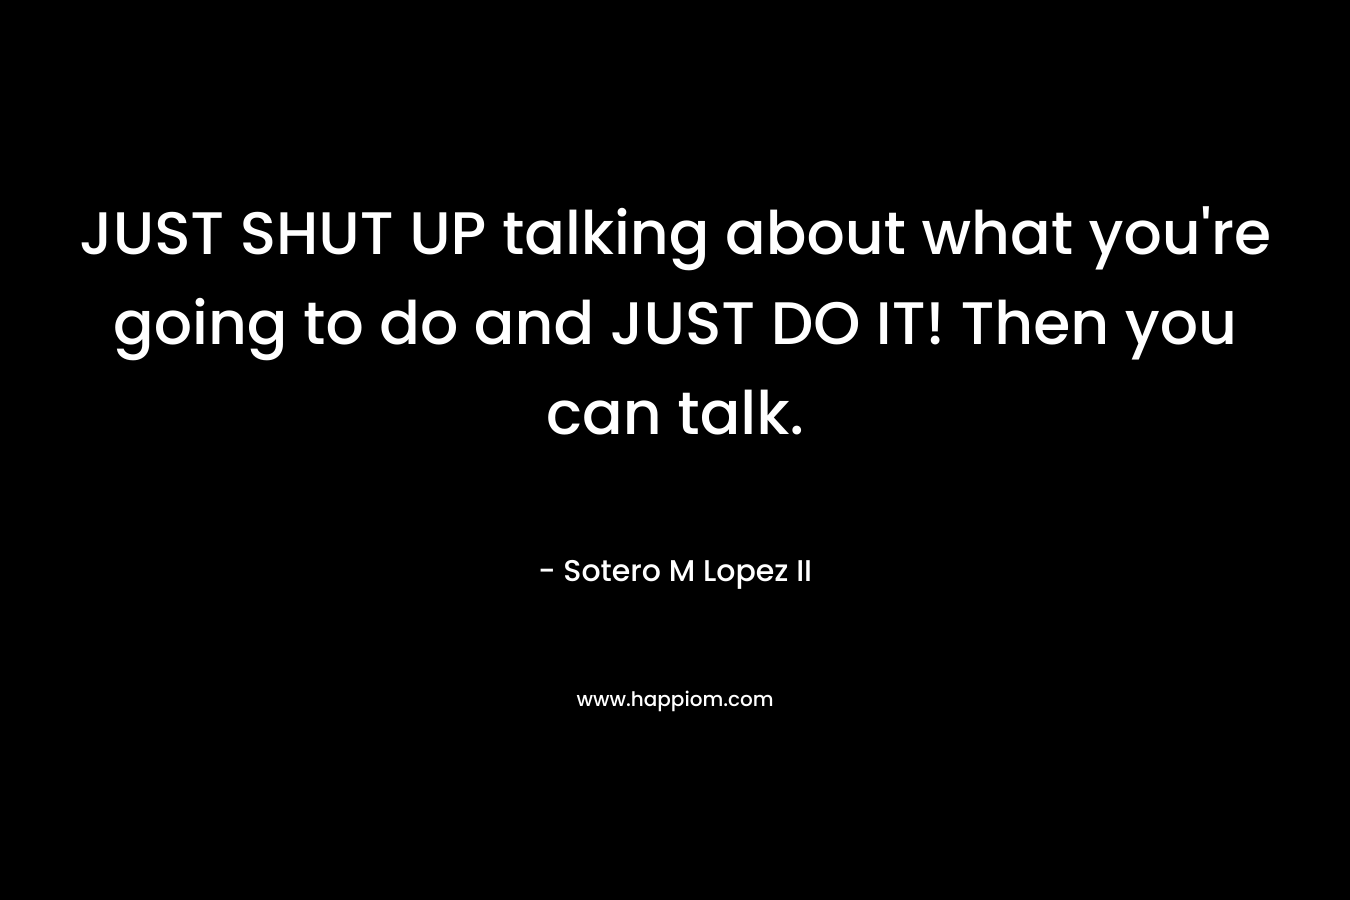 JUST SHUT UP talking about what you're going to do and JUST DO IT! Then you can talk.